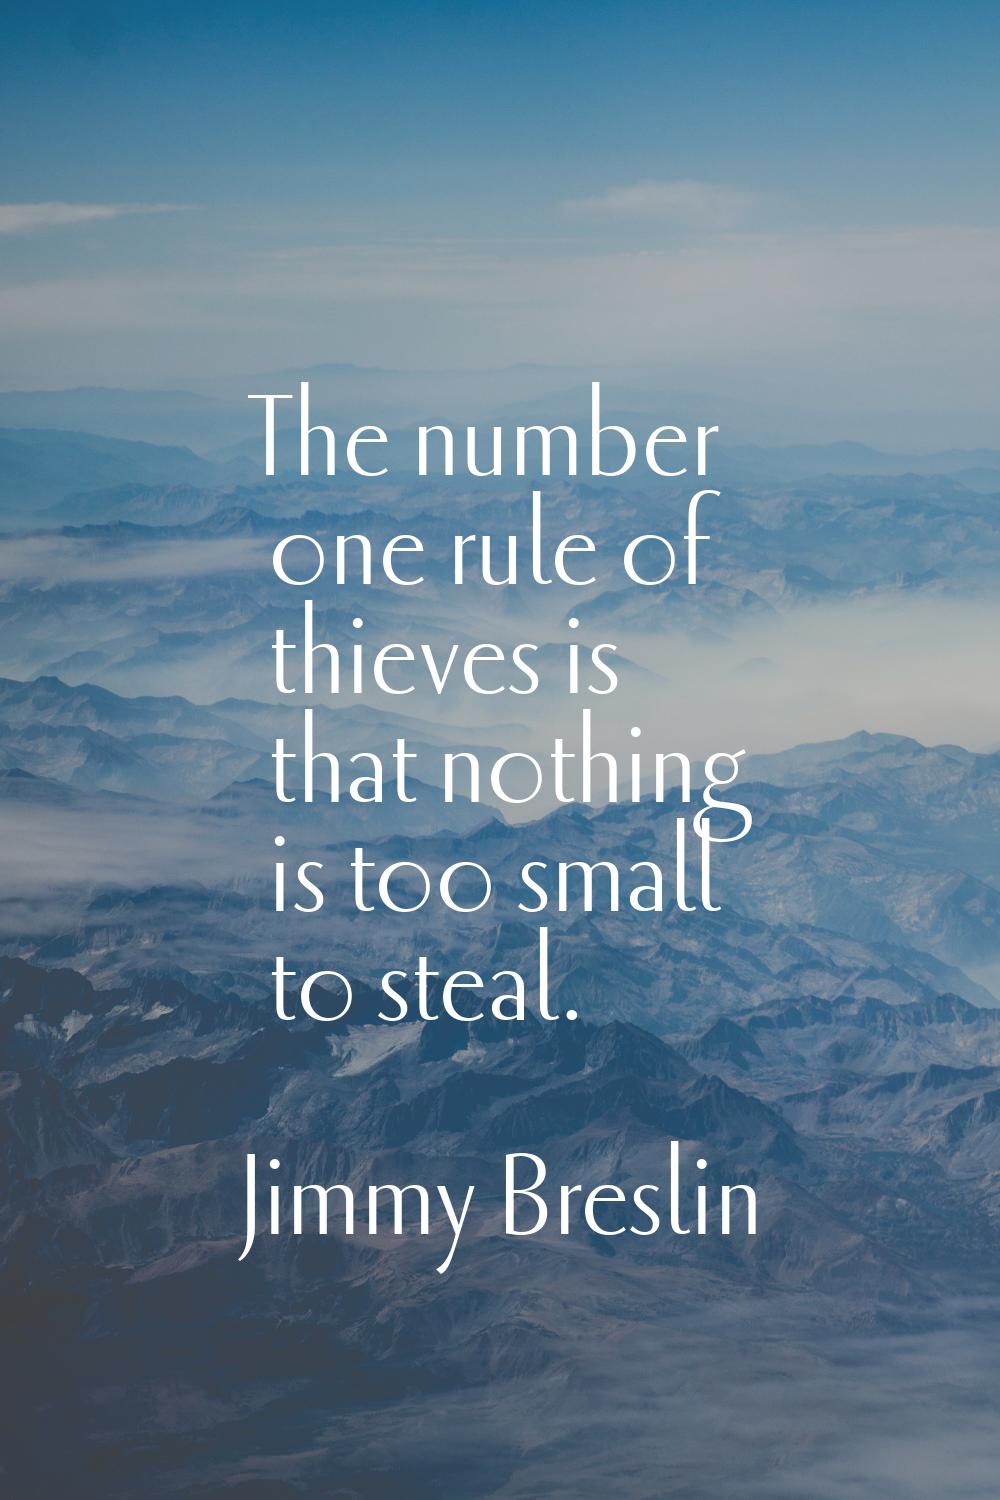 The number one rule of thieves is that nothing is too small to steal.